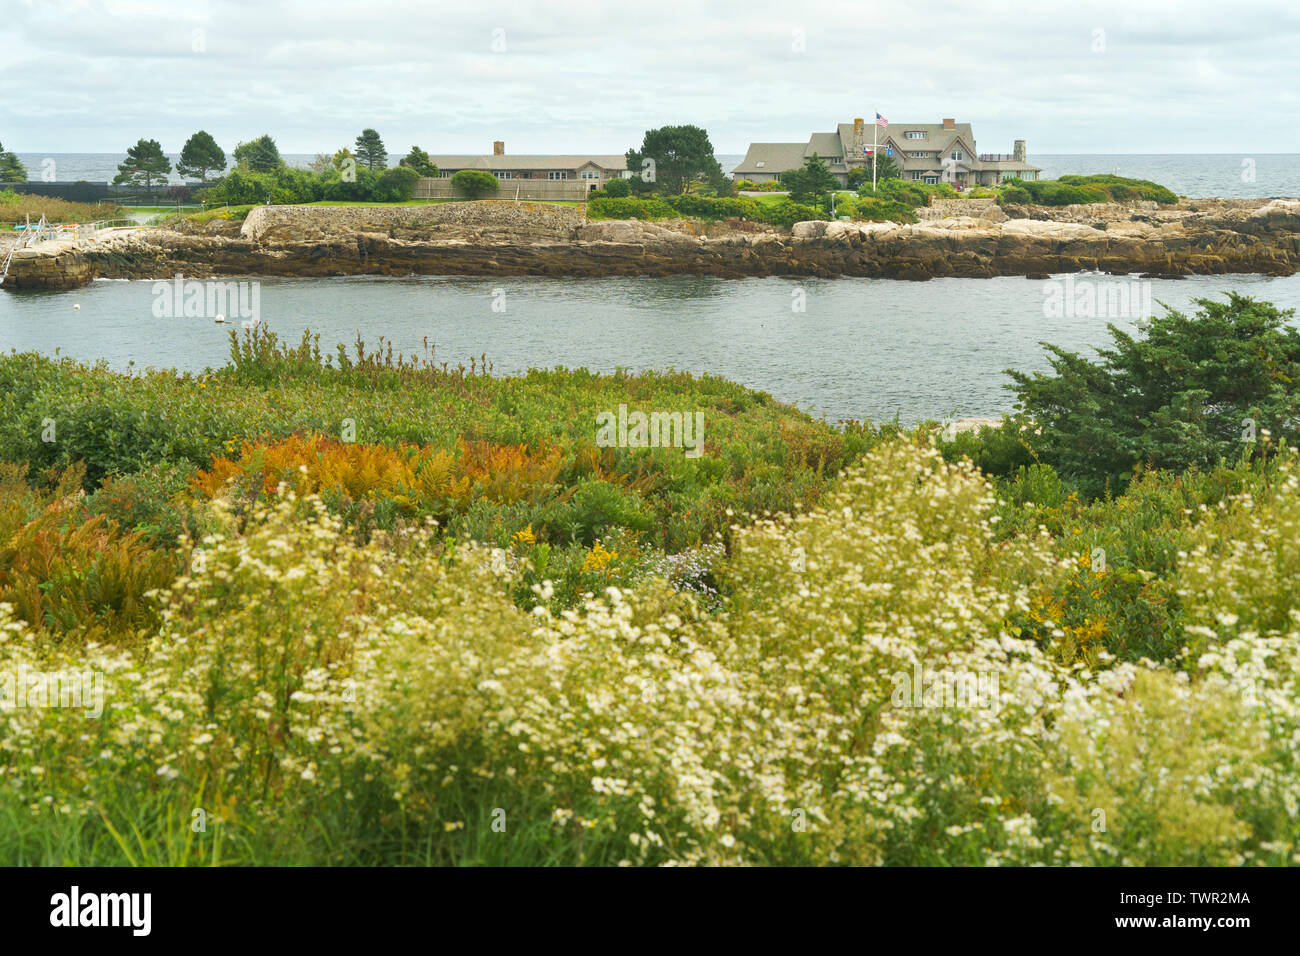 Summer estate of the Bush family, known as the Bush compound, at Walker's Point, Kennebunkport, Maine, USA. Stock Photo